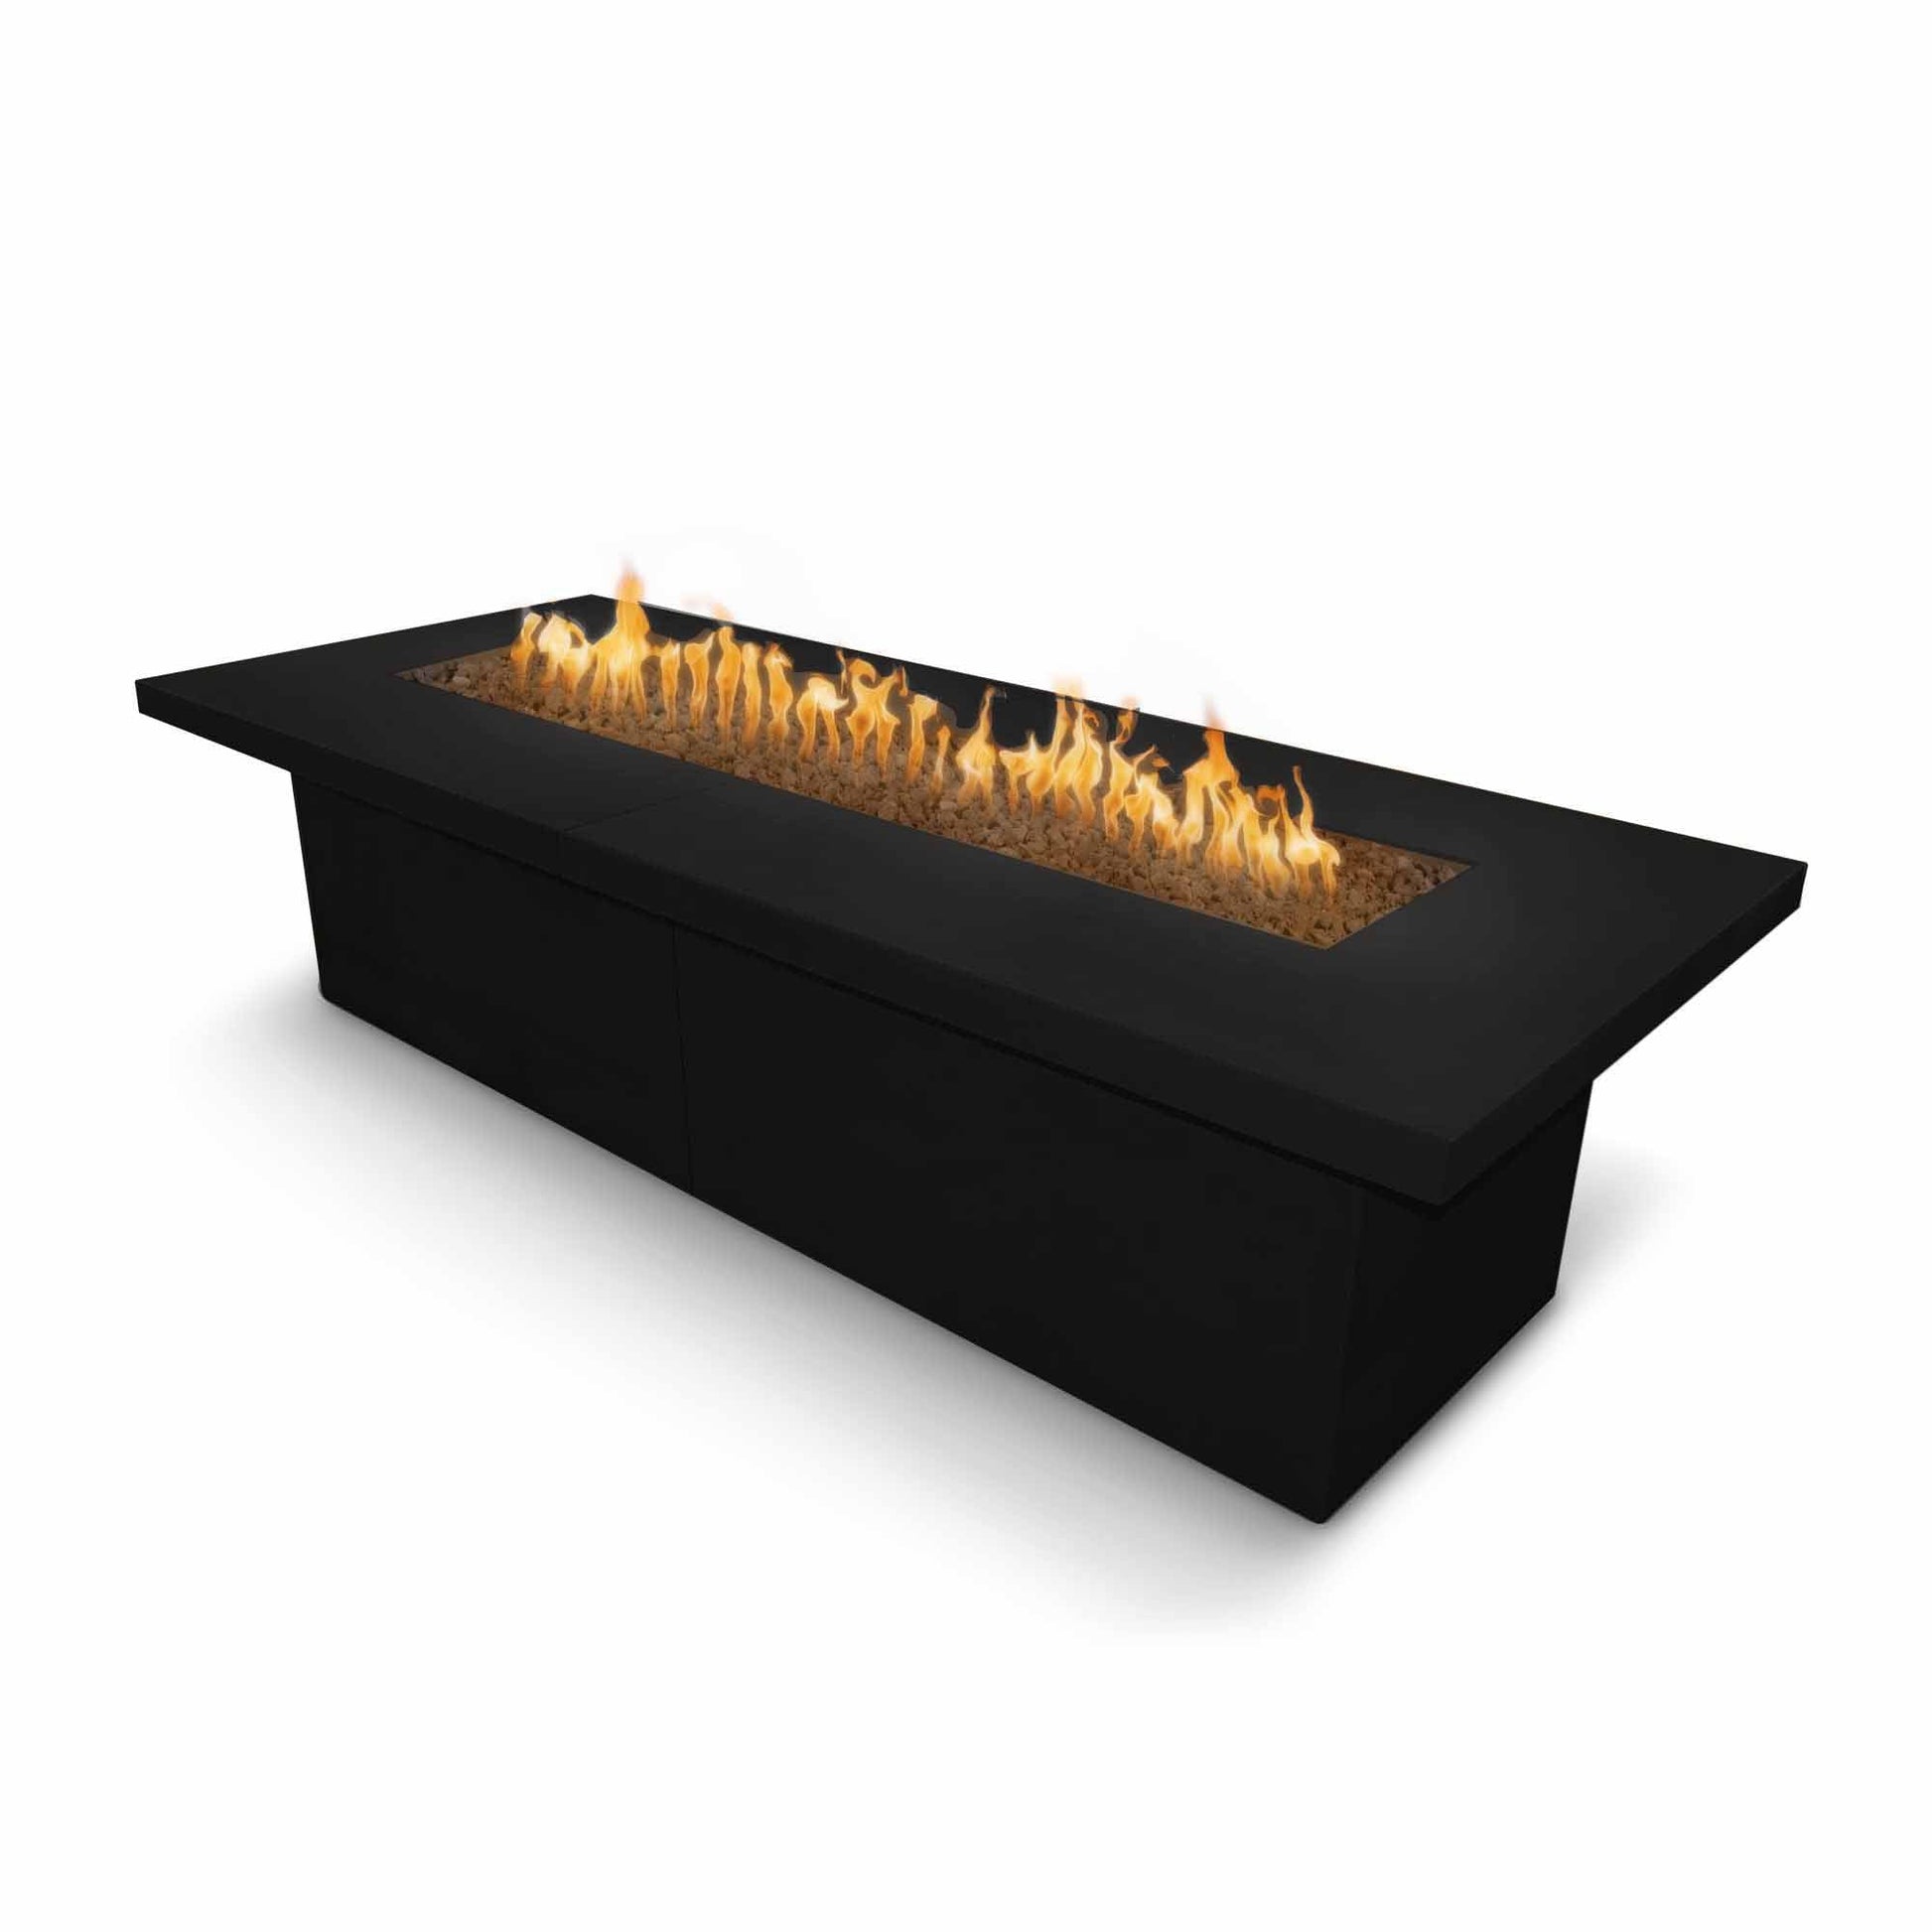 The Outdoor Plus Rectangular Newport 120" Hammered Copper Liquid Propane Fire Pit with 12V Electronic Ignition